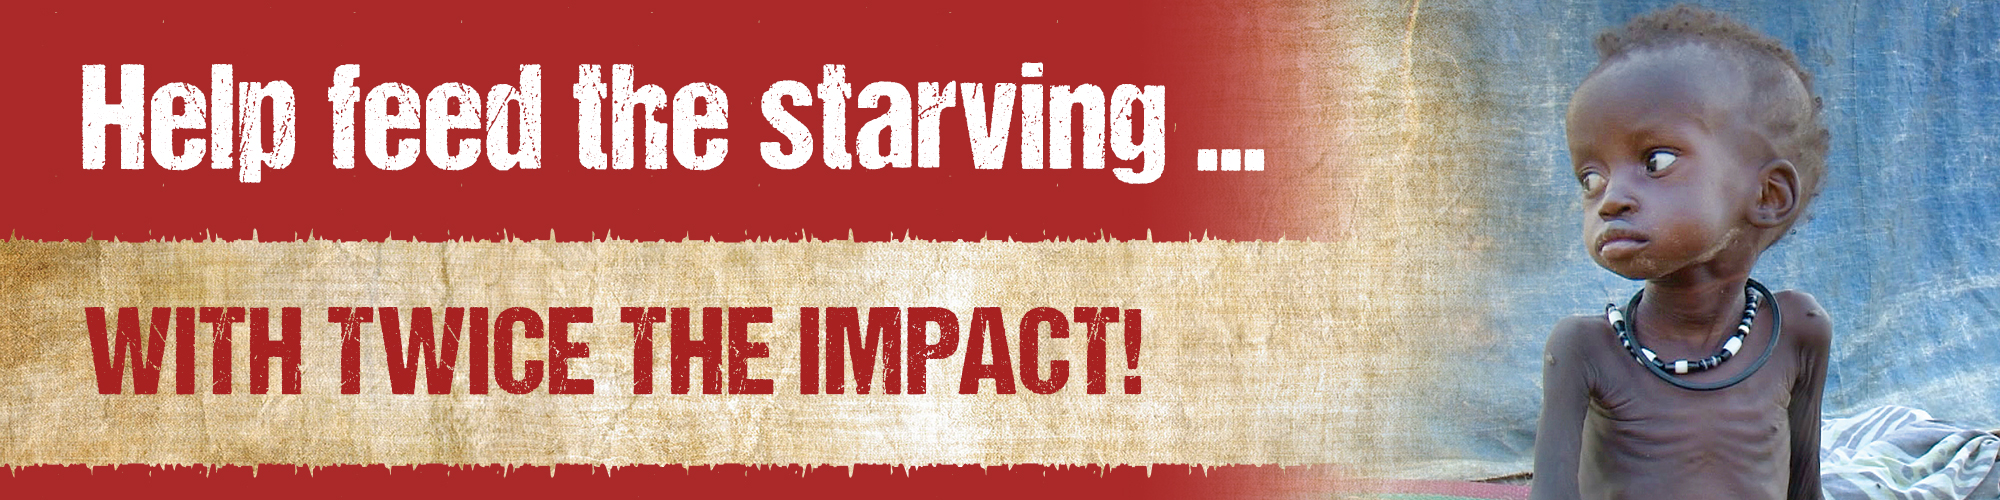 Help feed the starving... with TWICE the impact!